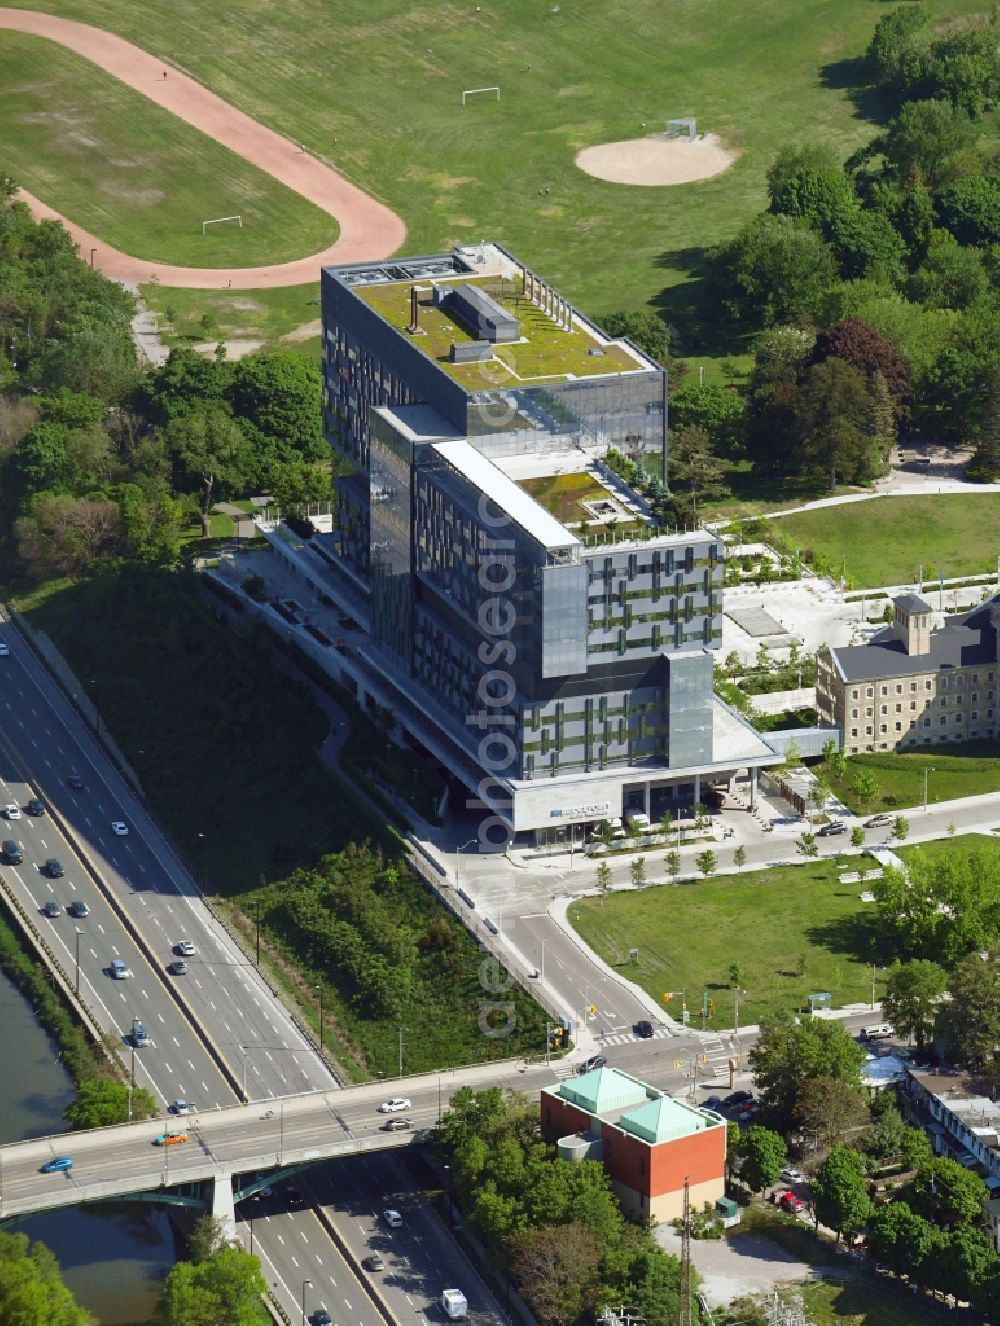 Toronto from the bird's eye view: Hospital grounds of the Clinic Bridgepoint Hospital on Jack Layton Way in Toronto in Ontario, Canada